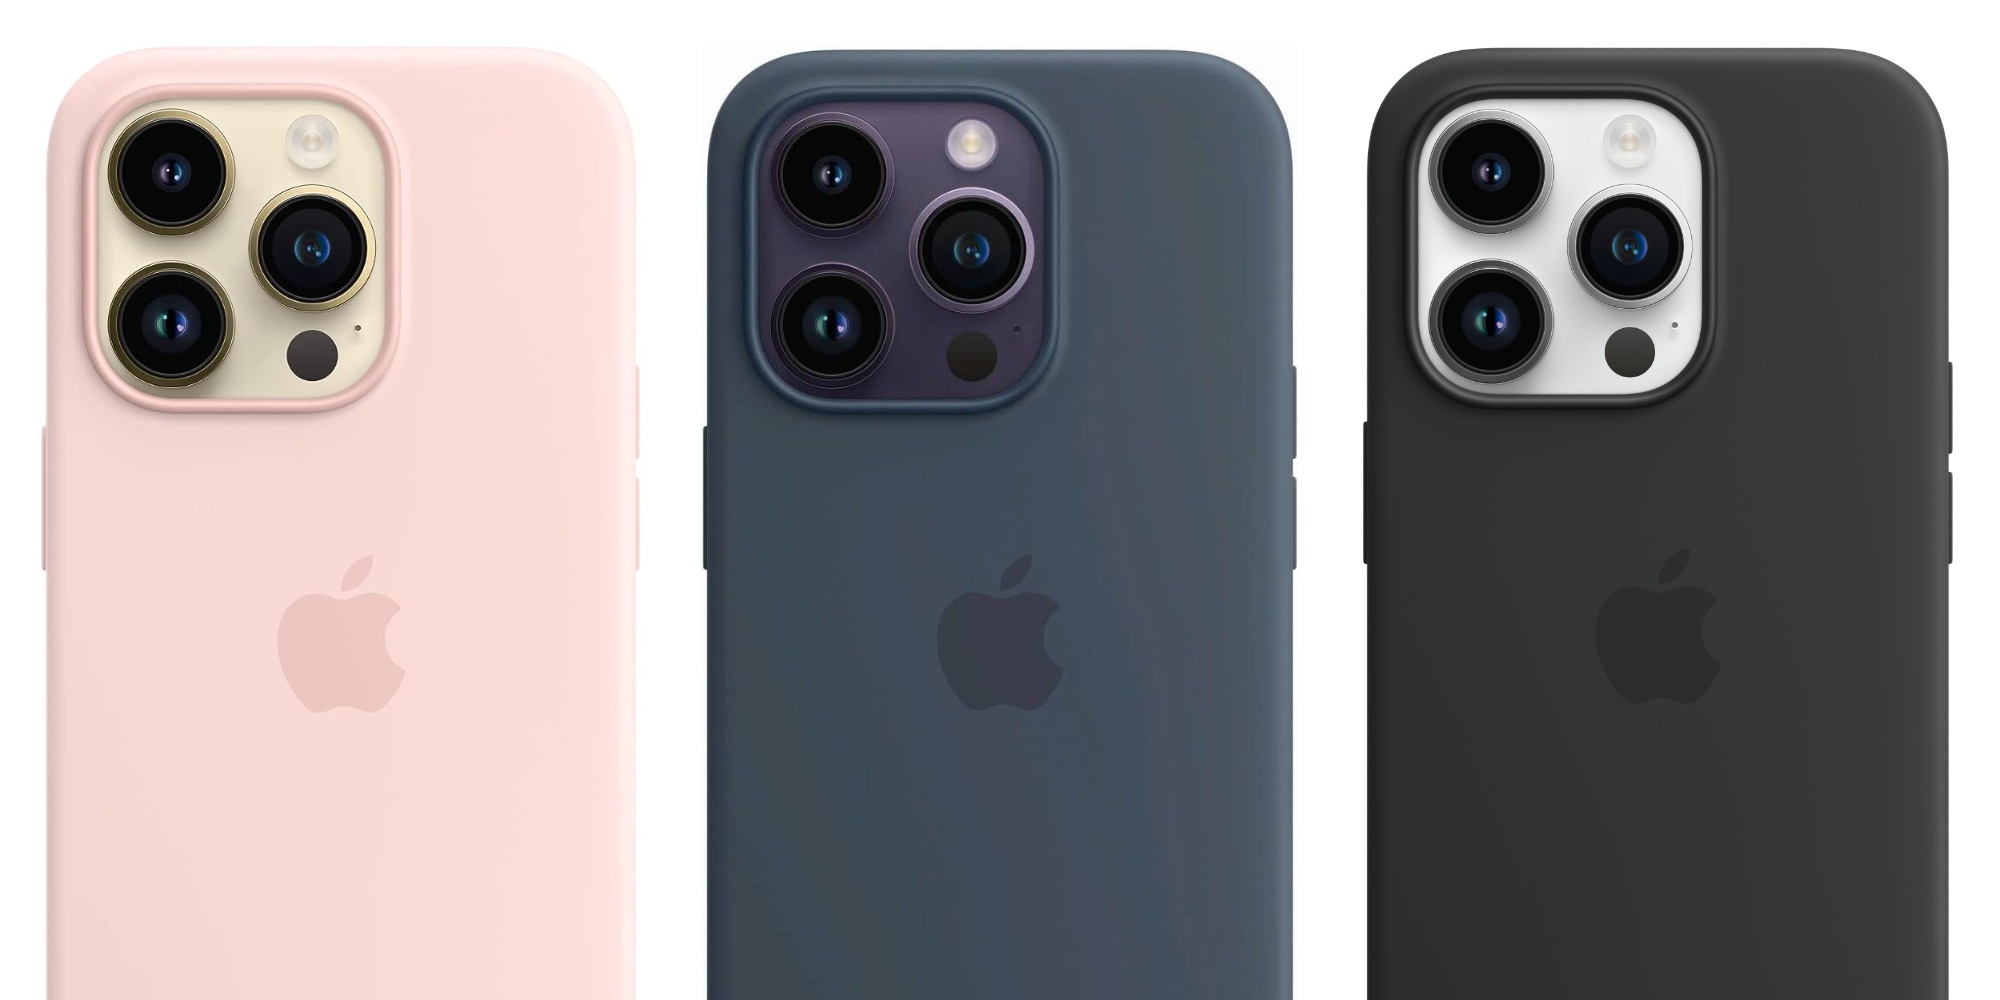 Rumor: Apple to discontinue silicone accessories, including iPhone cases  and Apple Watch bands - 9to5Mac